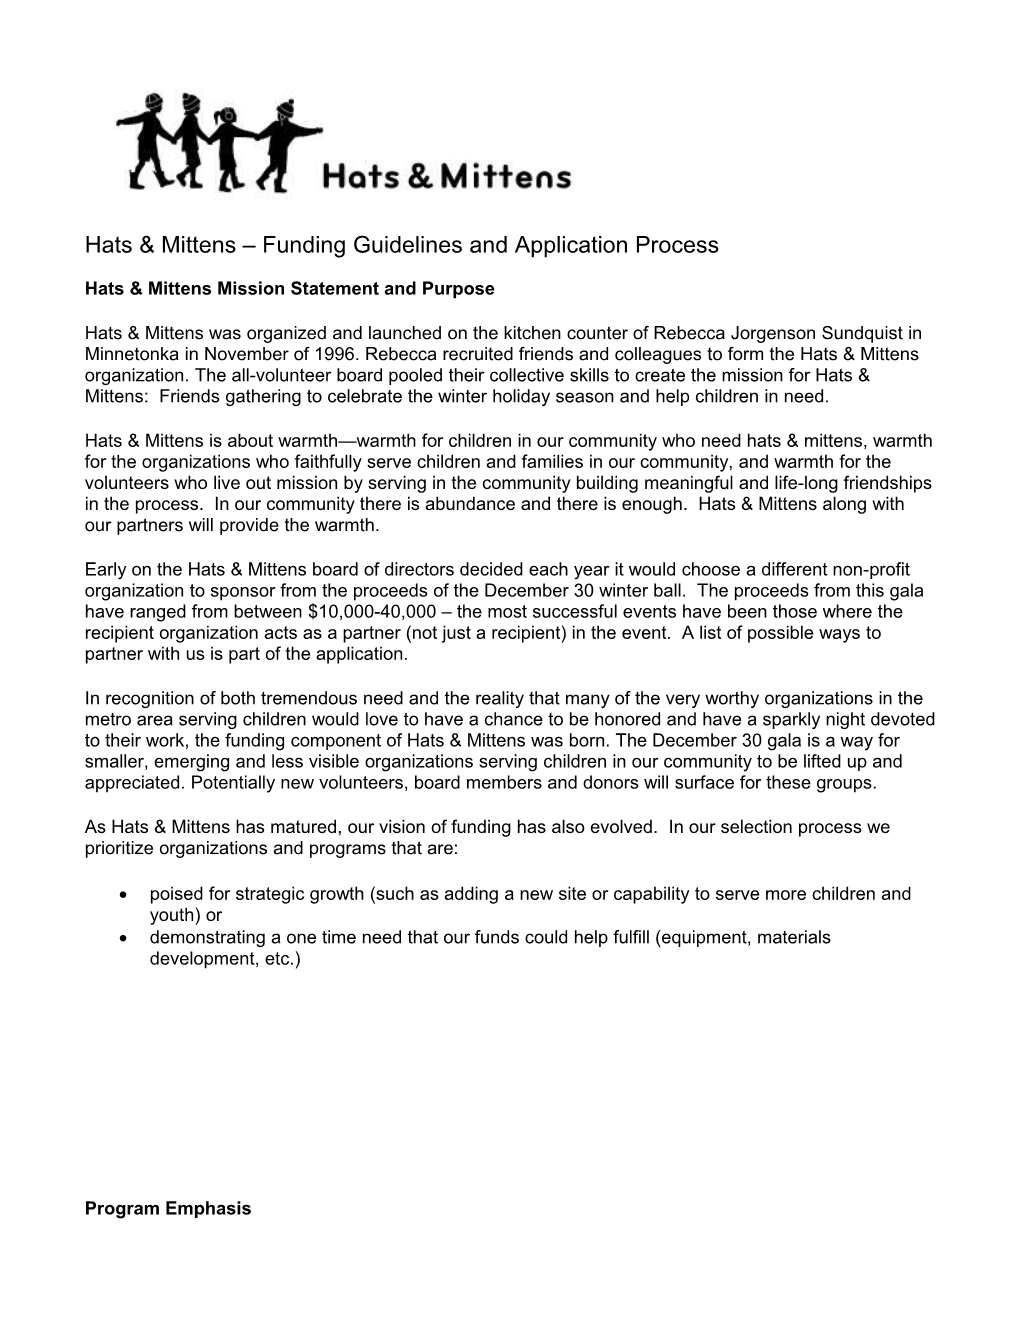 Hats & Mittens Funding Guidelines and Application Process